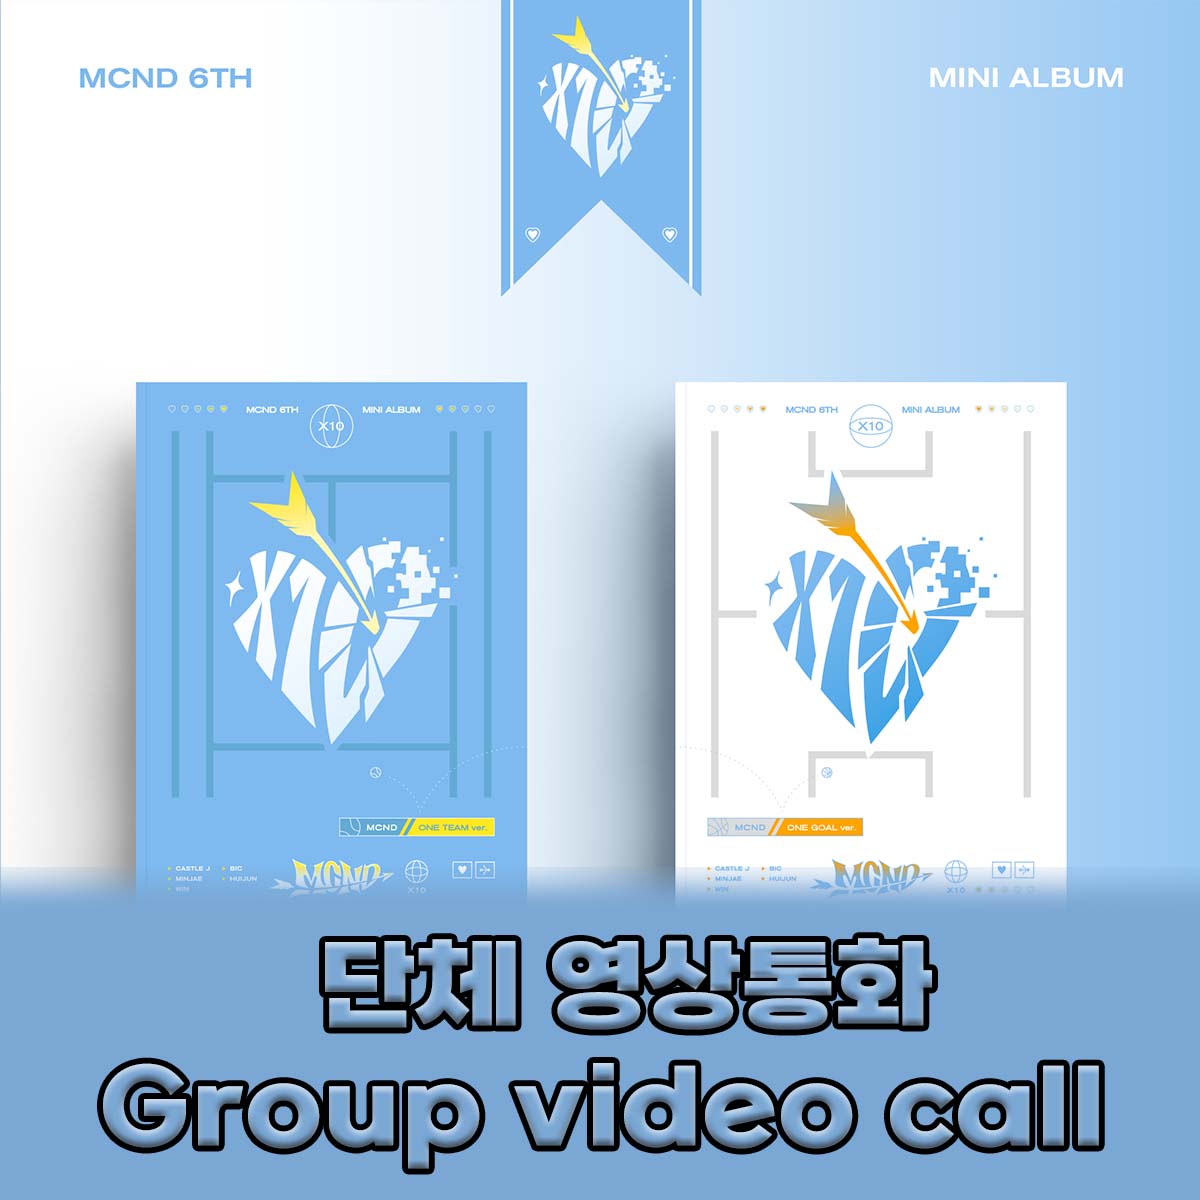 [0526 Pre-sale group video call] MCND 6th MINI ALBUM [X10] Group video call fan signing event